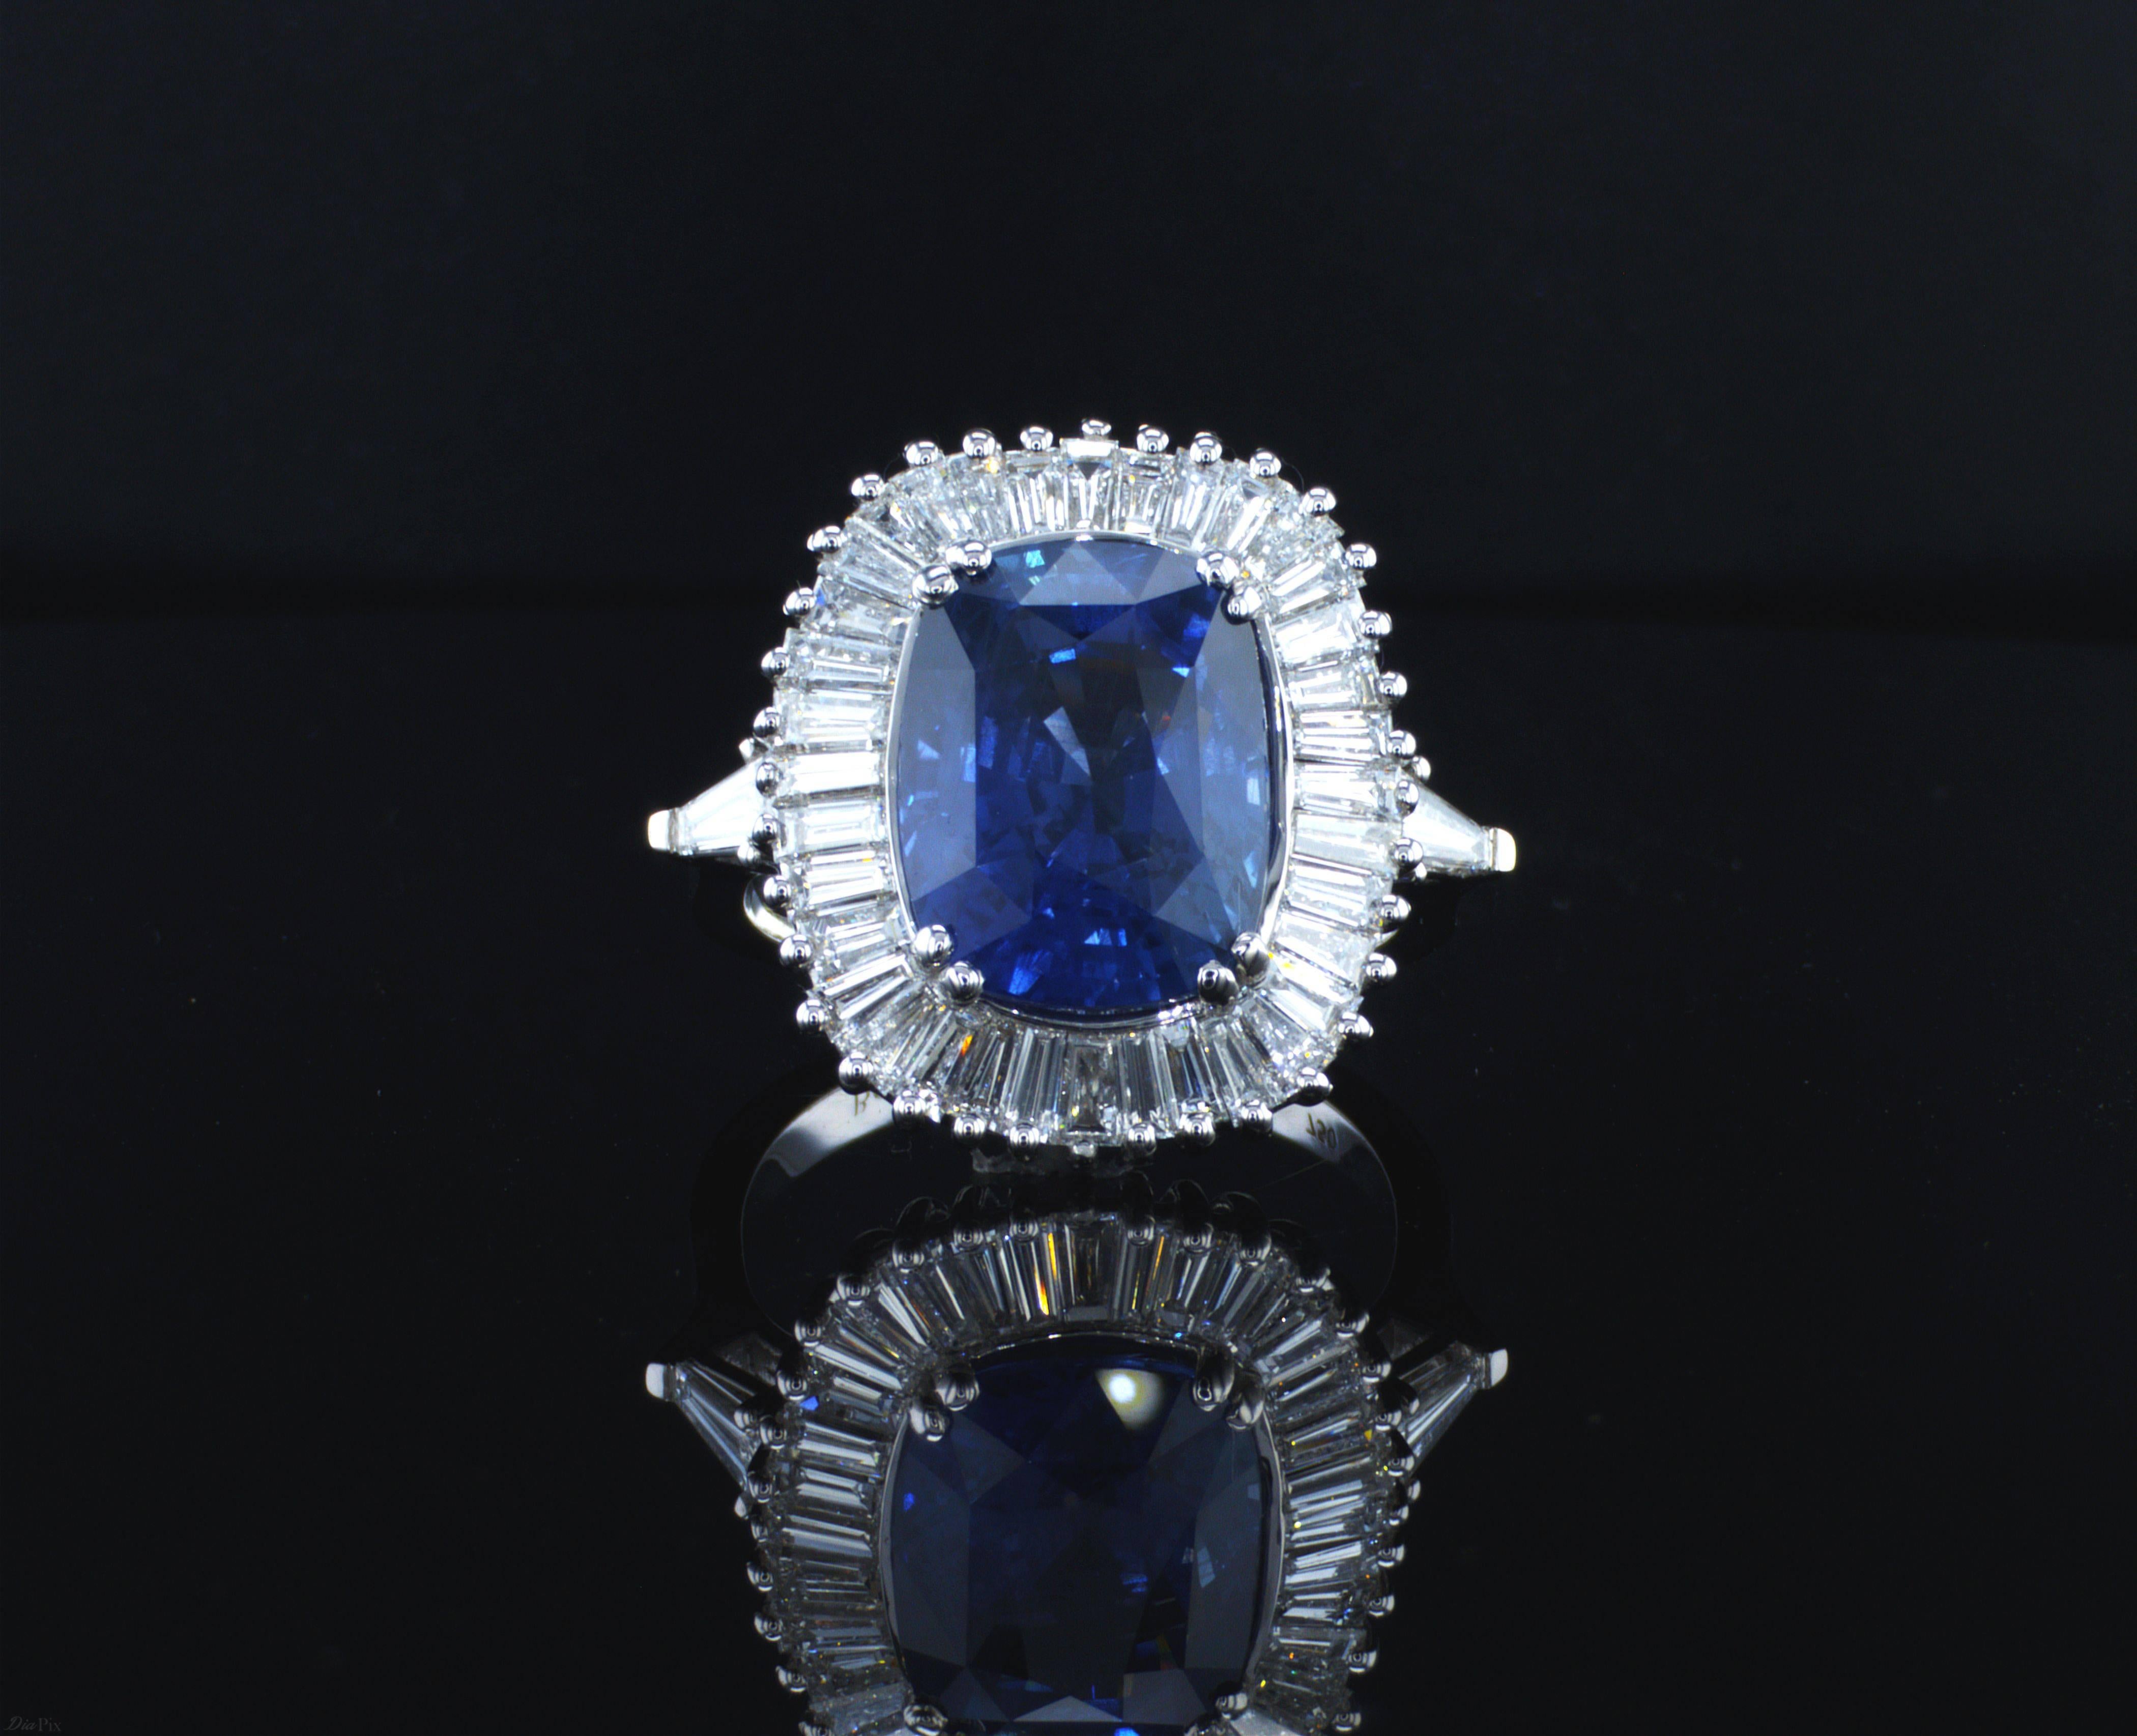 7.63 Carat Cushion Cut Blue Sapphire in border of 38 high quality tapered baguette shaped diamonds1.77 Carat TDW.  Our magnificent ring is made with precise detailed craftsmanship. 
Jewel Details: 

Center- 7.63 Carat Cushion Cut Natural Blue